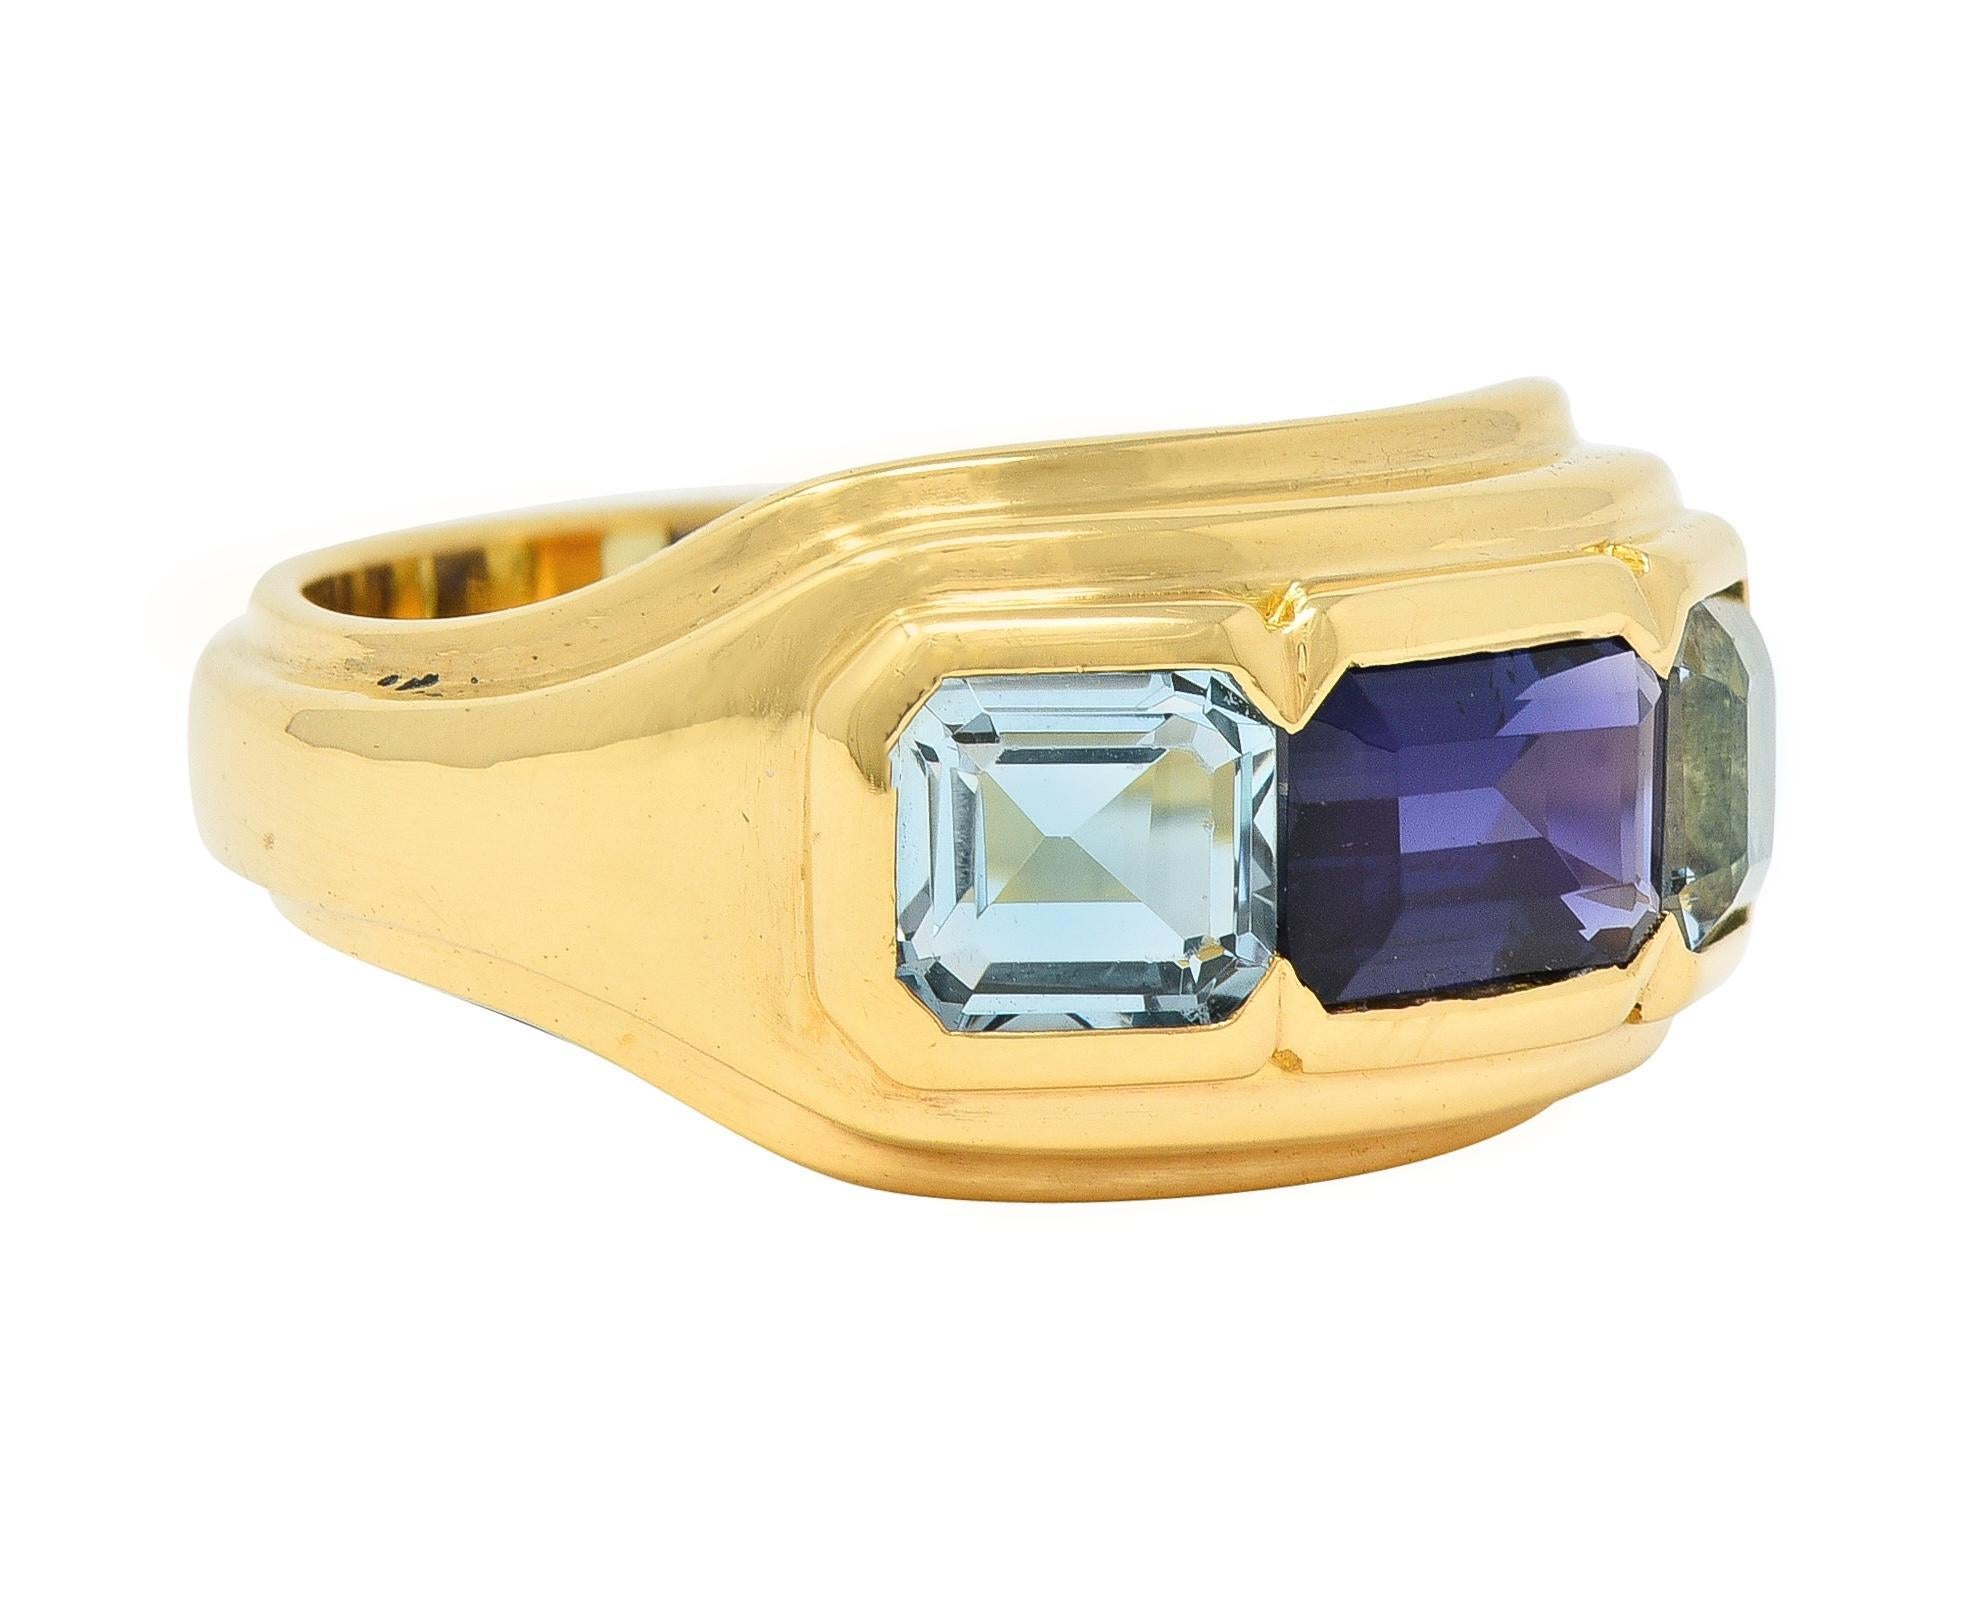 Centering an emerald cut sapphire weighing approximately 1.54 carats - transparent dark blue in color 
Set east to west and flanked by emerald cut aquamarines - weighing approximately 1.26 carats total
Transparent light blue in color - gemstones are